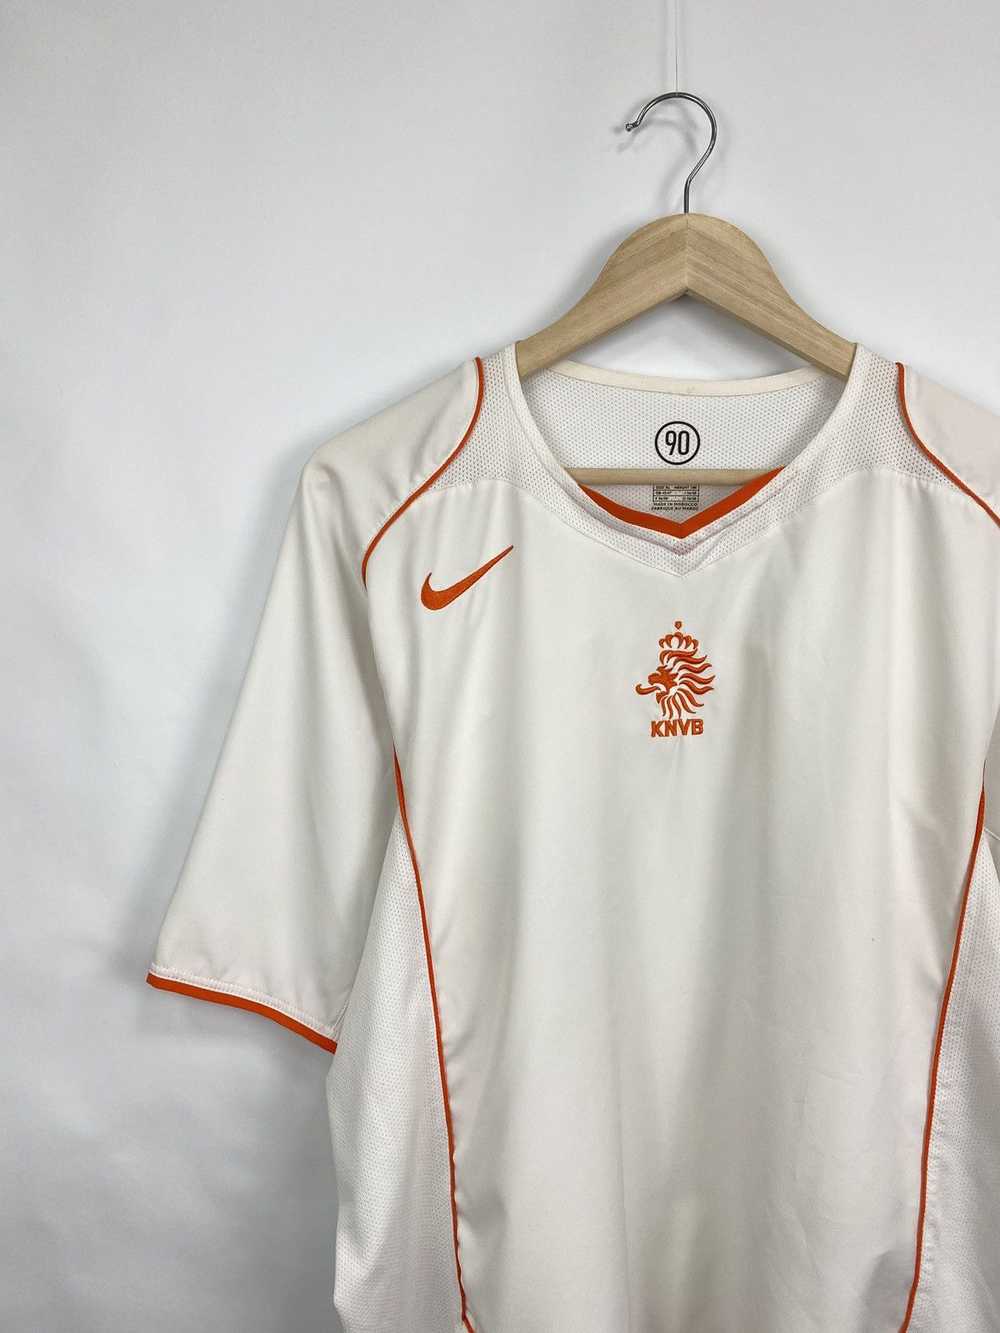 Fifa World Cup × Nike × Soccer Jersey Vintage 90s… - image 2